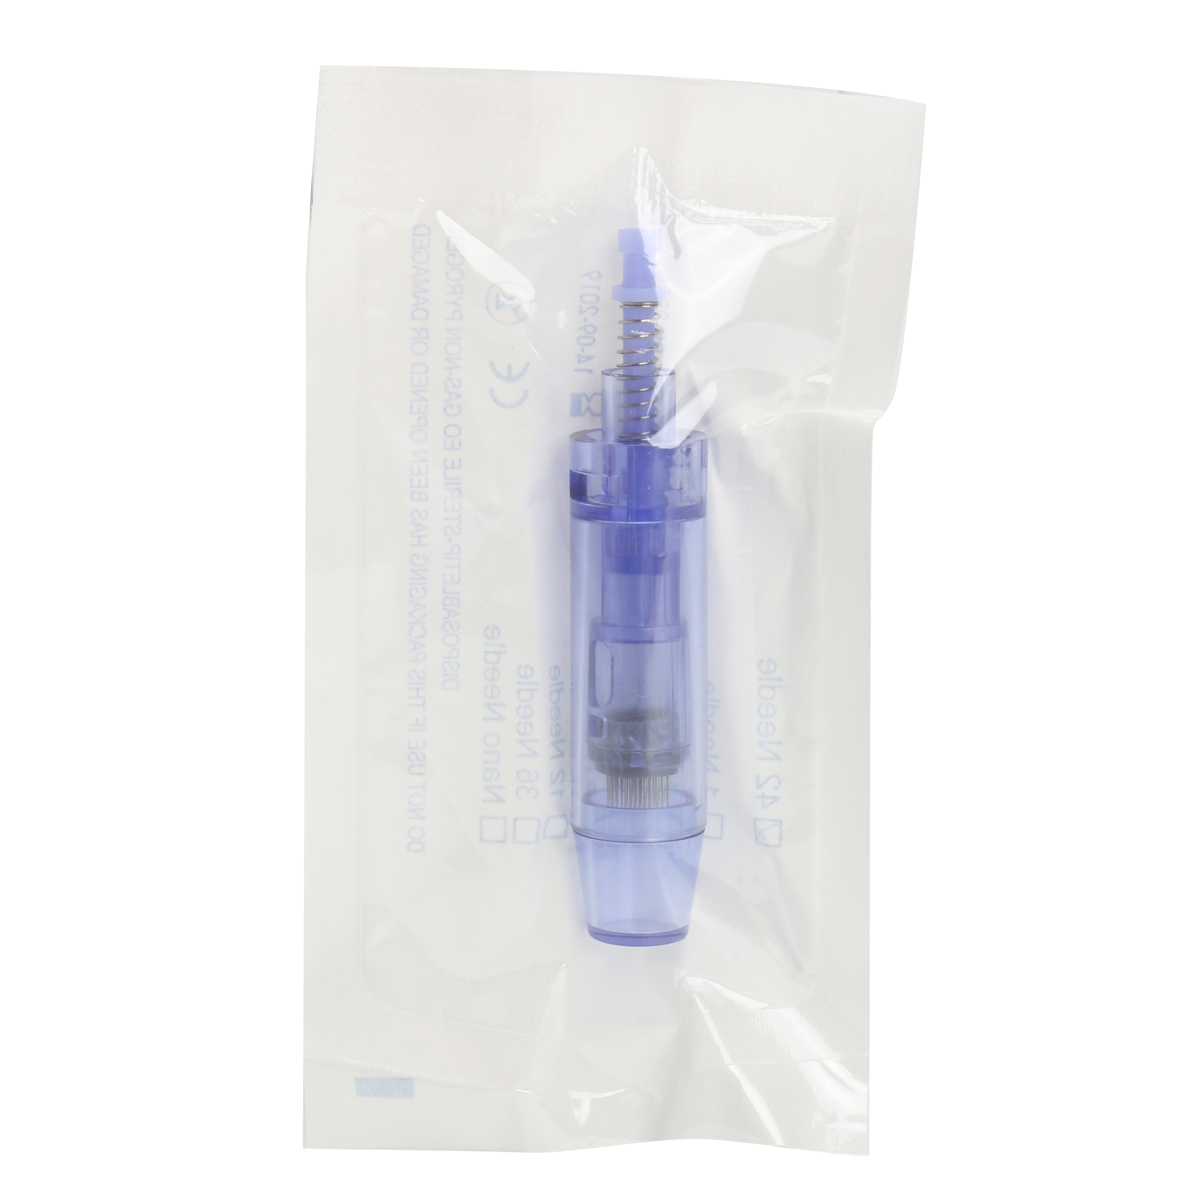 5Pcs-42Pin-Needle-Cartridge-Tip-For-A1-Dr-Pen-Electric-Auto-Micro-Stamp-Derma-Anti-Aging-Pen-1249399